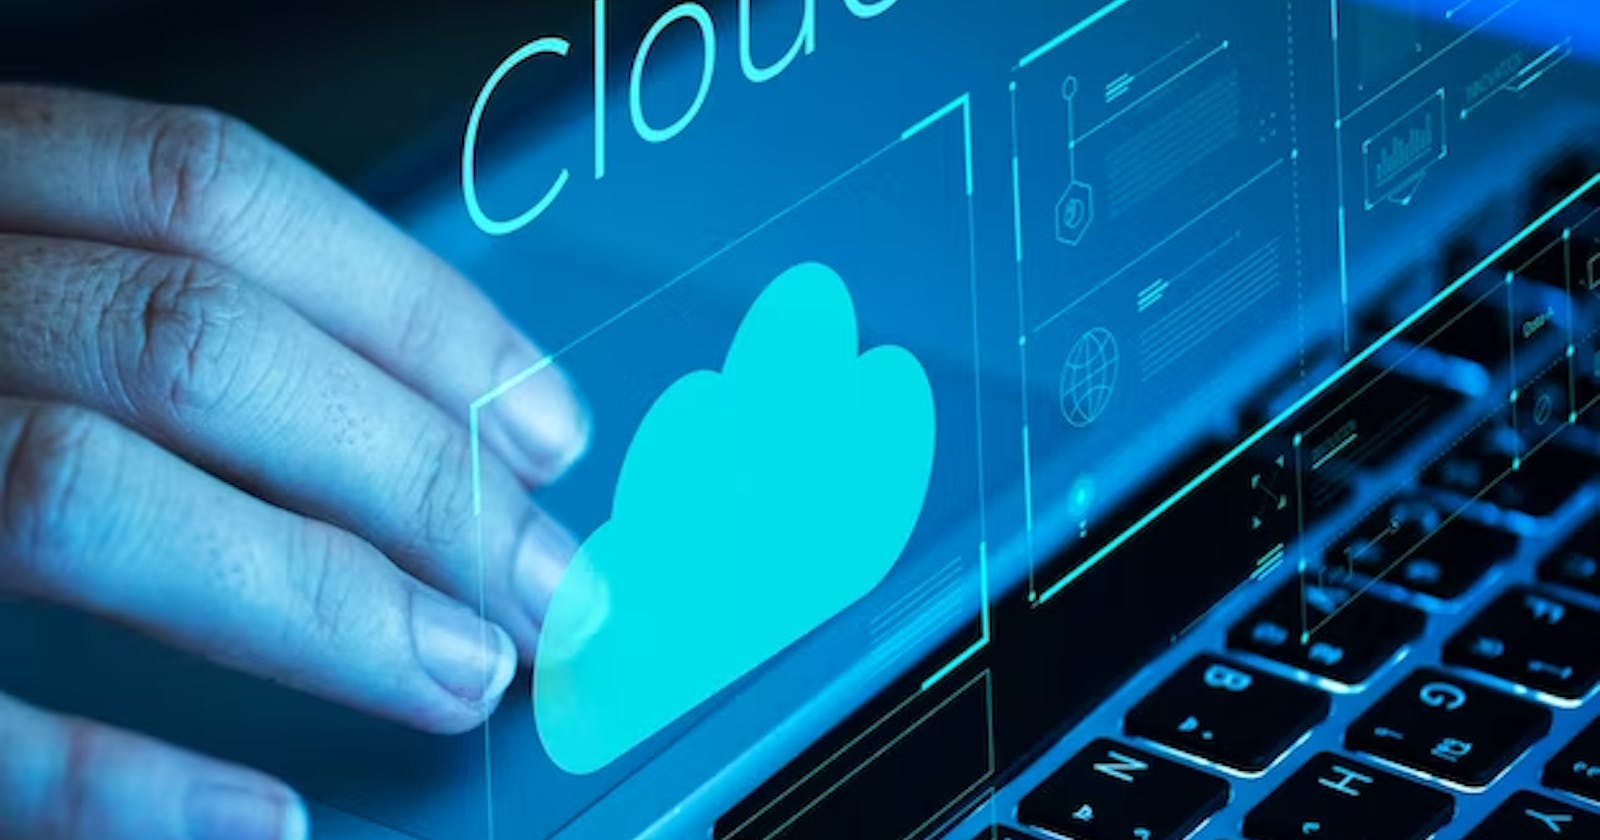 Cloud Computing: Your First Look into the Cloud